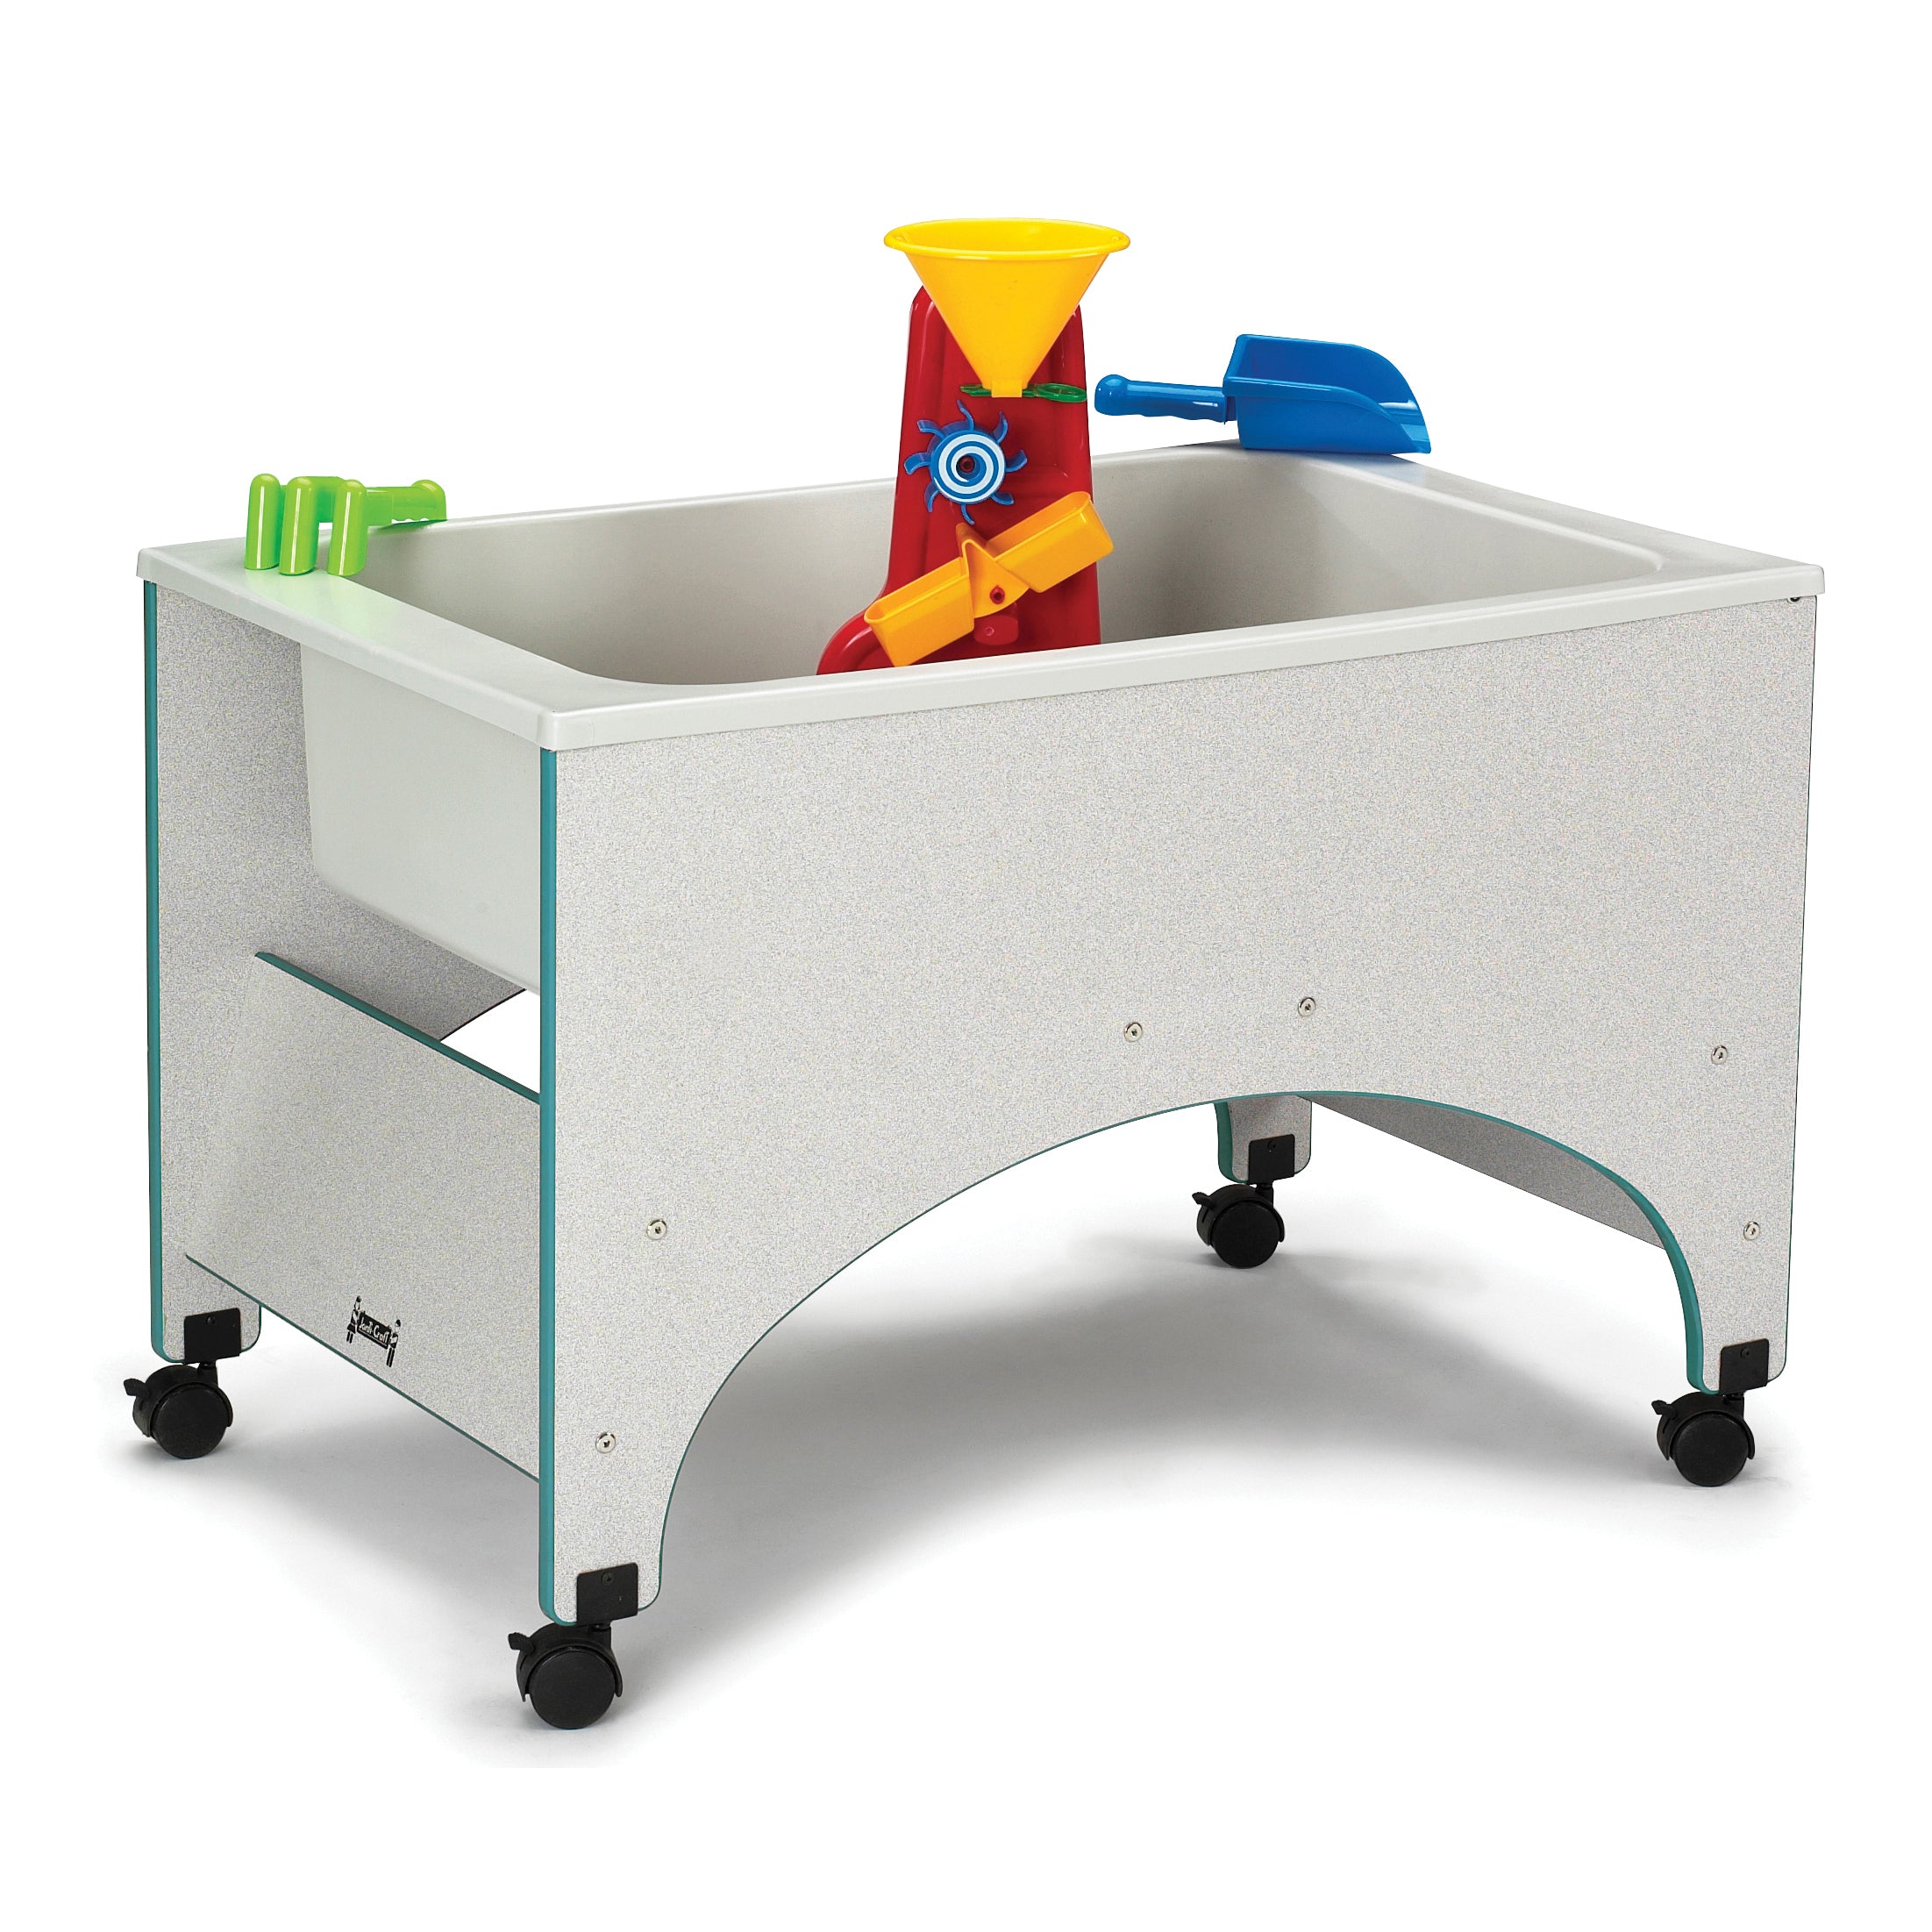 2857JC005, Rainbow Accents Space Saver Sensory Table - Teal